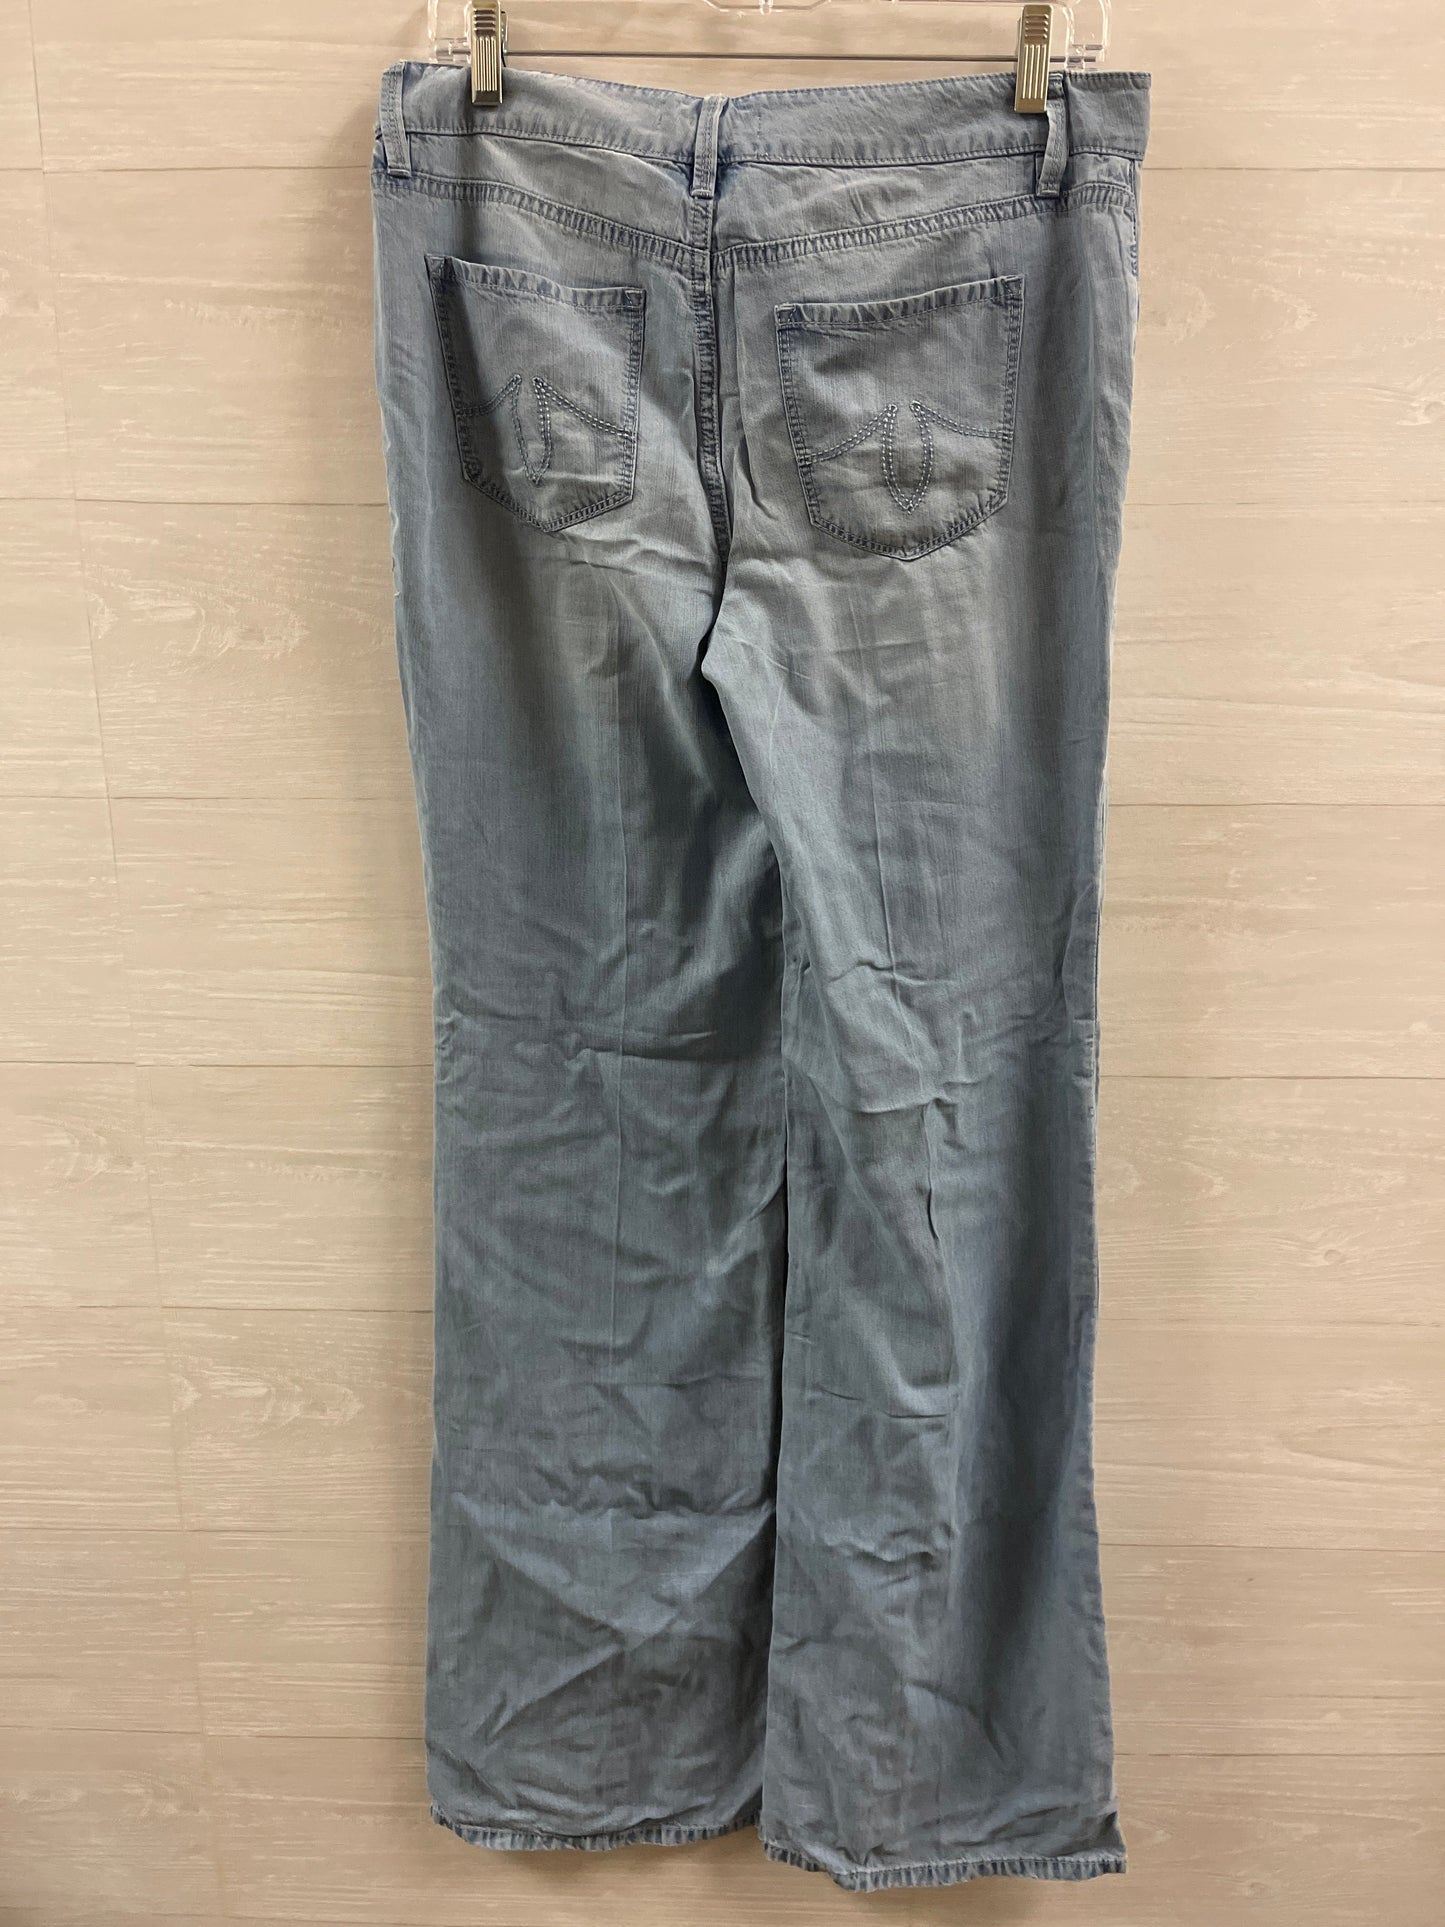 Jeans Relaxed/boyfriend By Level 99  Size: 4